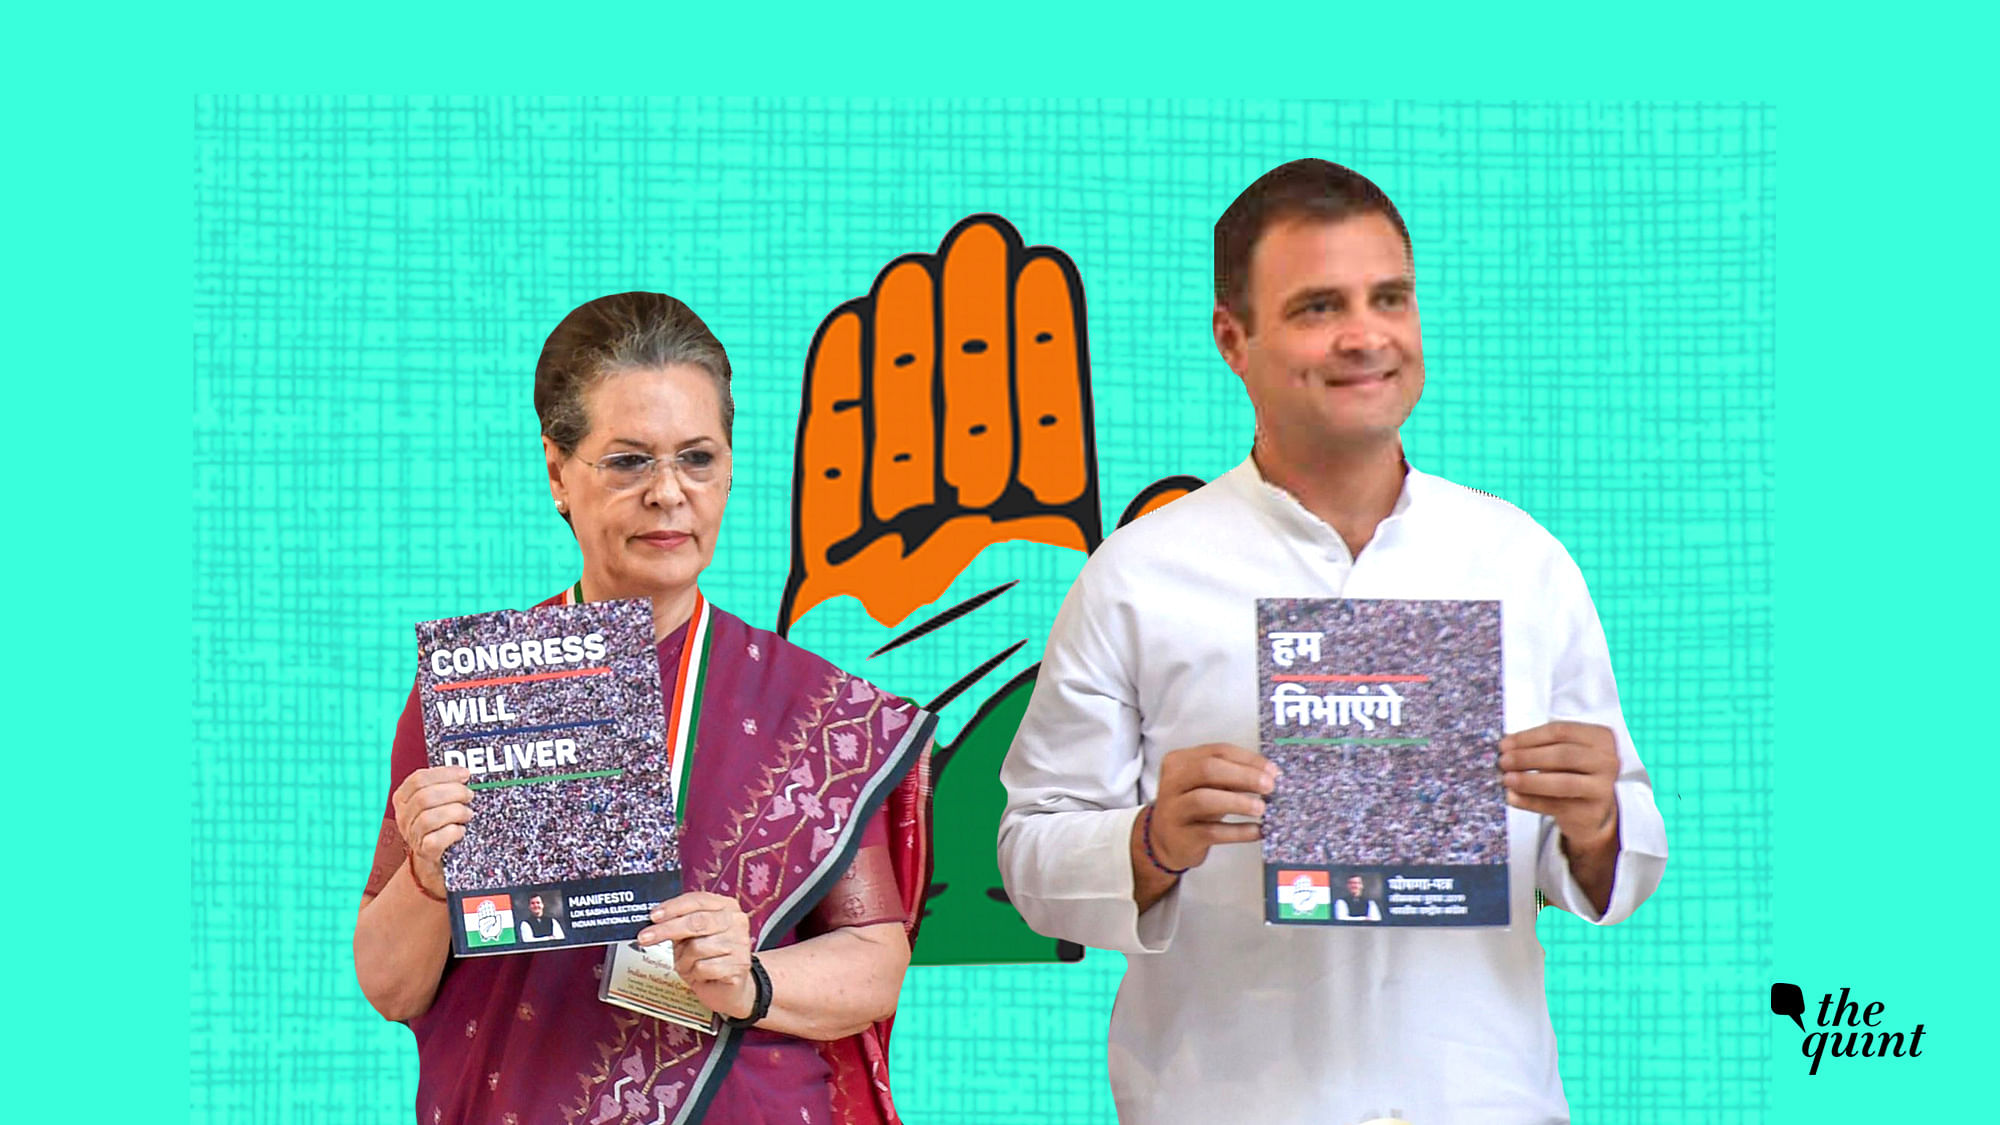 Image of Sonia Gandhi and Rahul Gandhi holding the Congress’ poll manifesto days before 2019 polls, used for representational purposes.